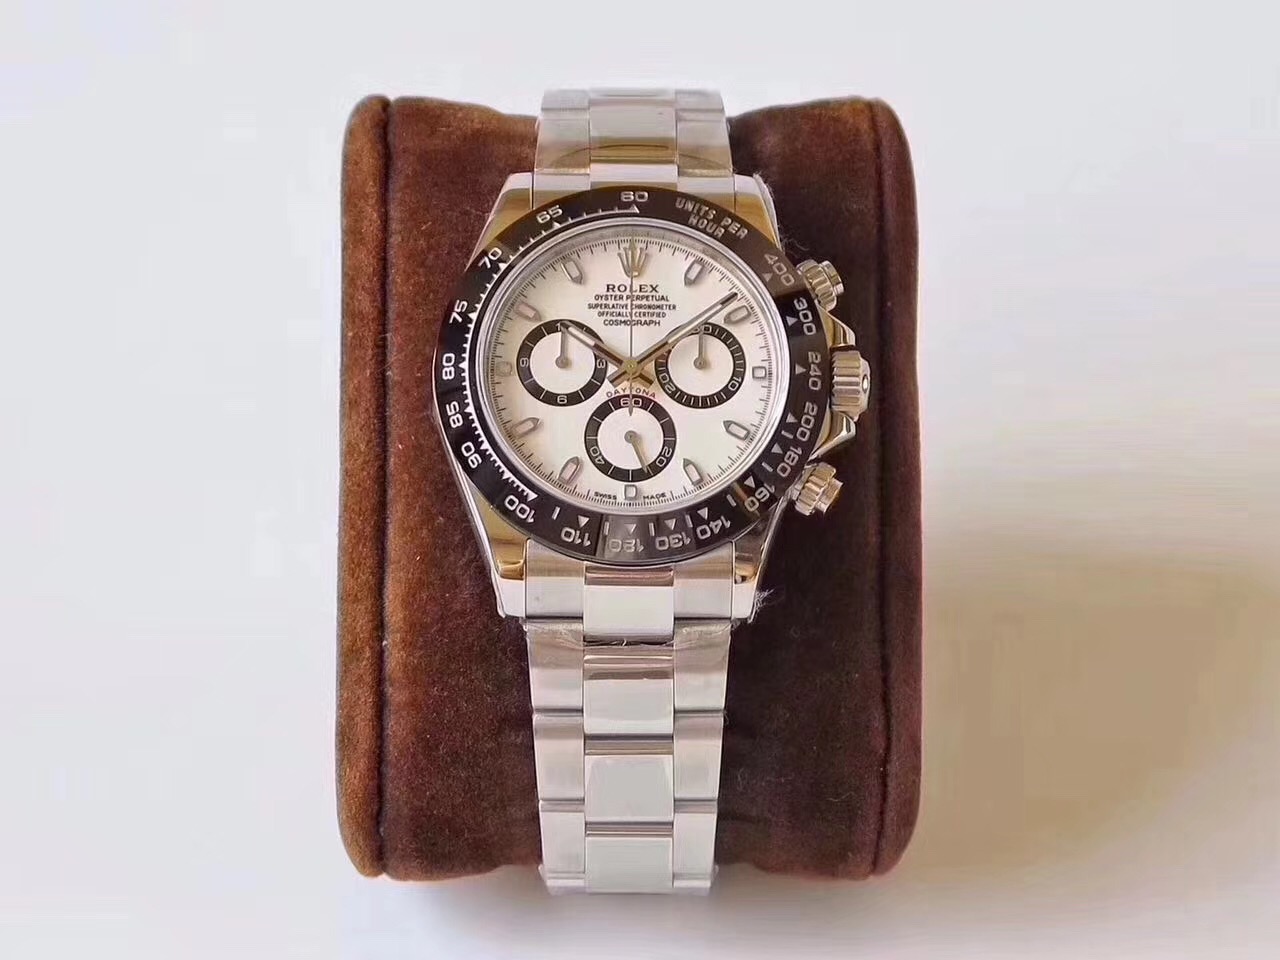 AR Factory Rolex Cosmograph Daytona Series 116500LN-78590 White Plate Watch - Click Image to Close